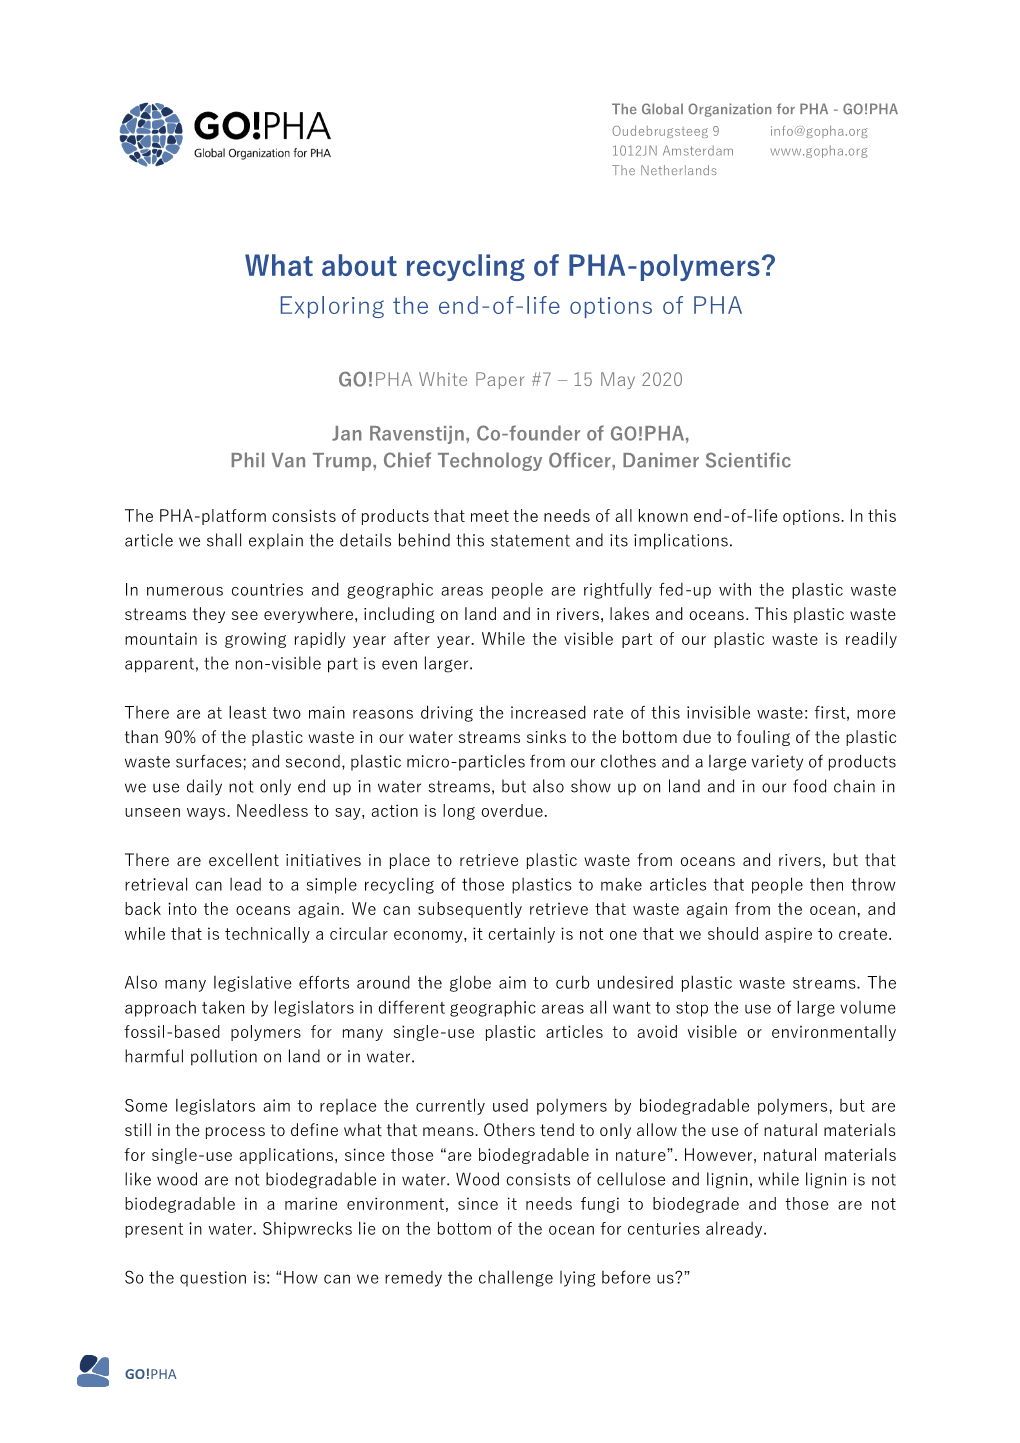 What About Recycling of PHA-Polymers? Exploring the End-Of-Life Options of PHA